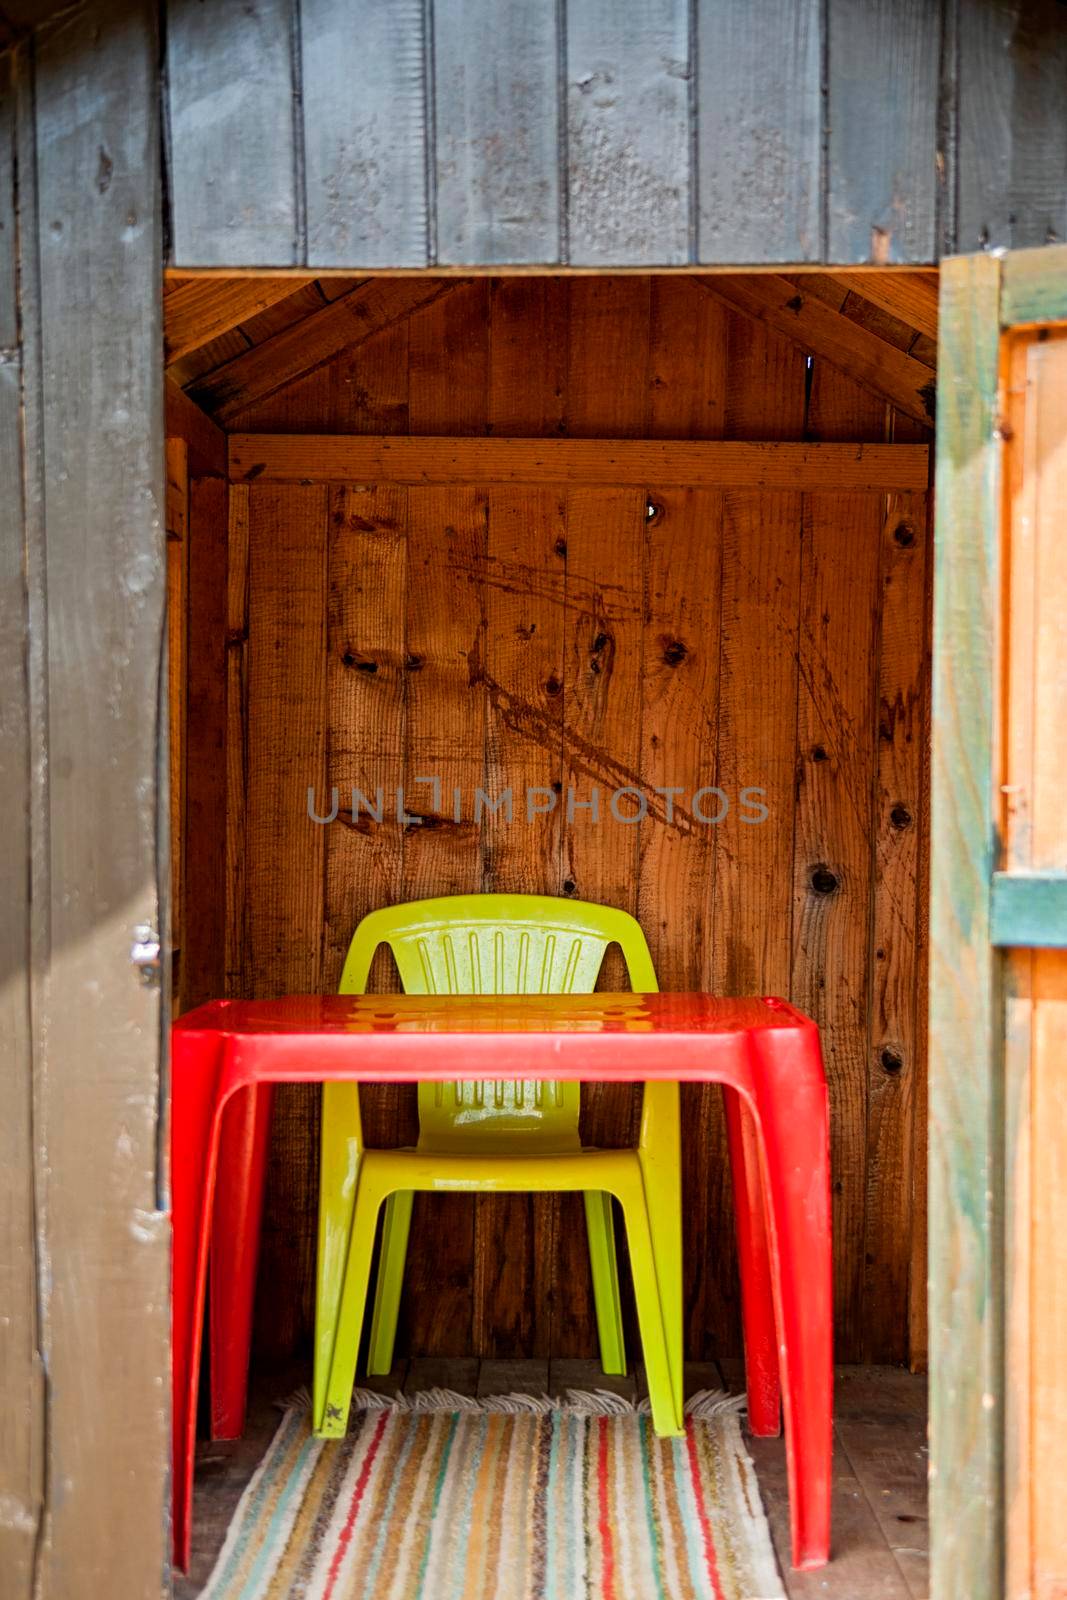 Inside of the childrens plsyig hut. There is a room only for red plastic table and yellow chair.